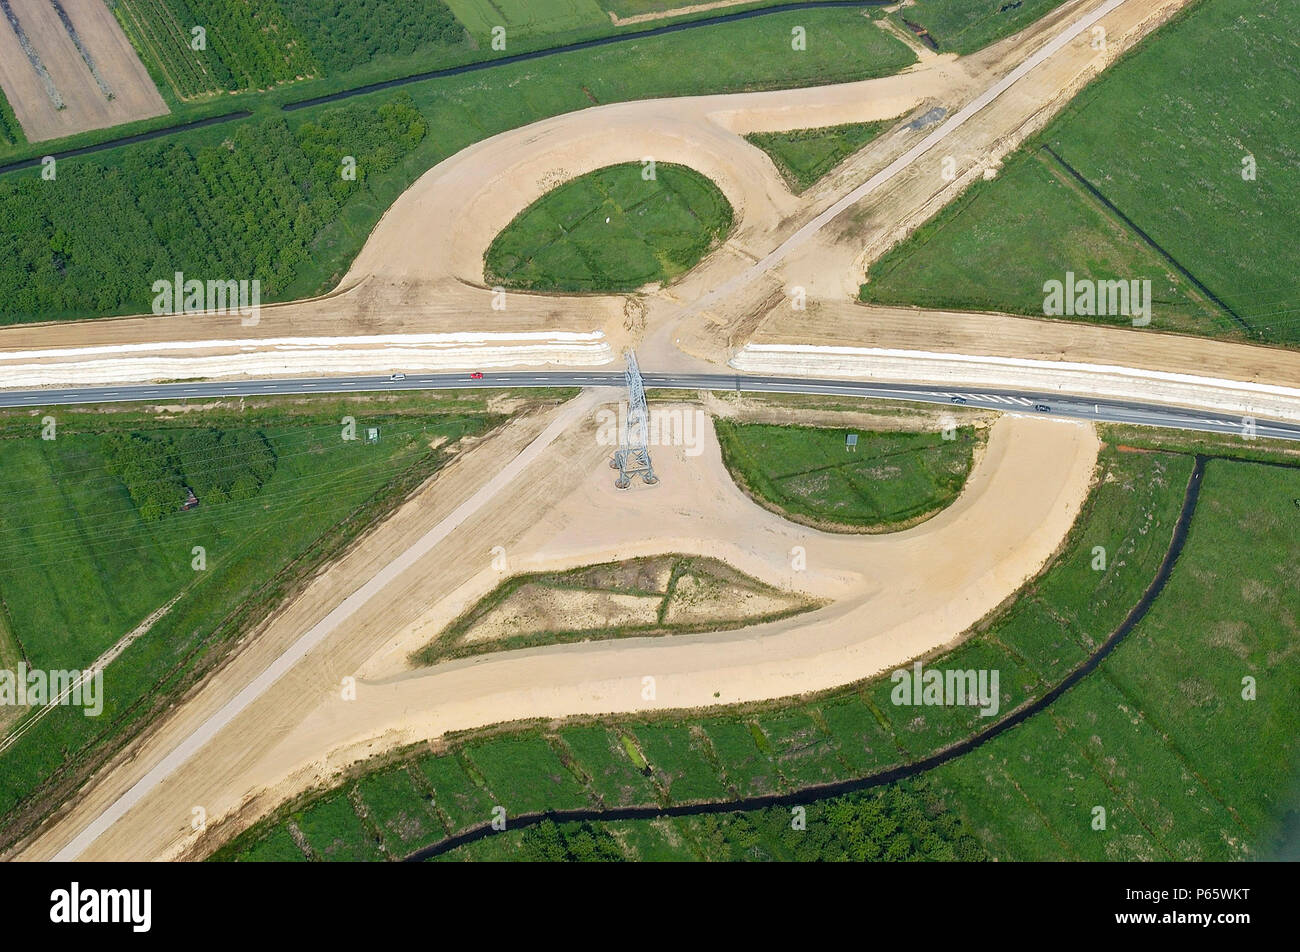 Construction of a new junction linking the new A26 with the existing A7 motorway, Niedersachsen, Lower Saxony, Germany Stock Photo